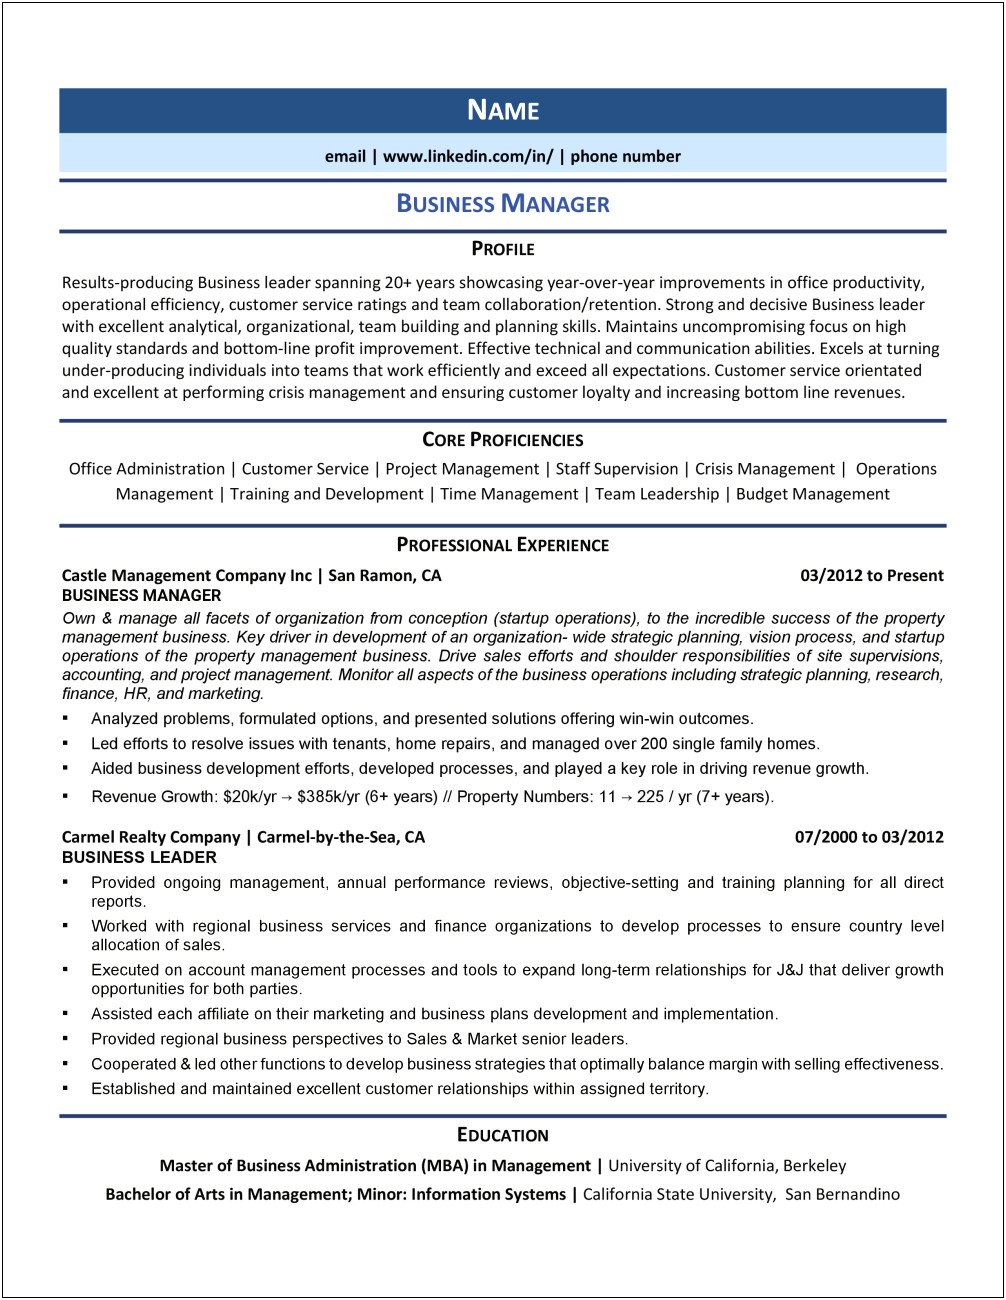 Sample Resume For School Business Manager